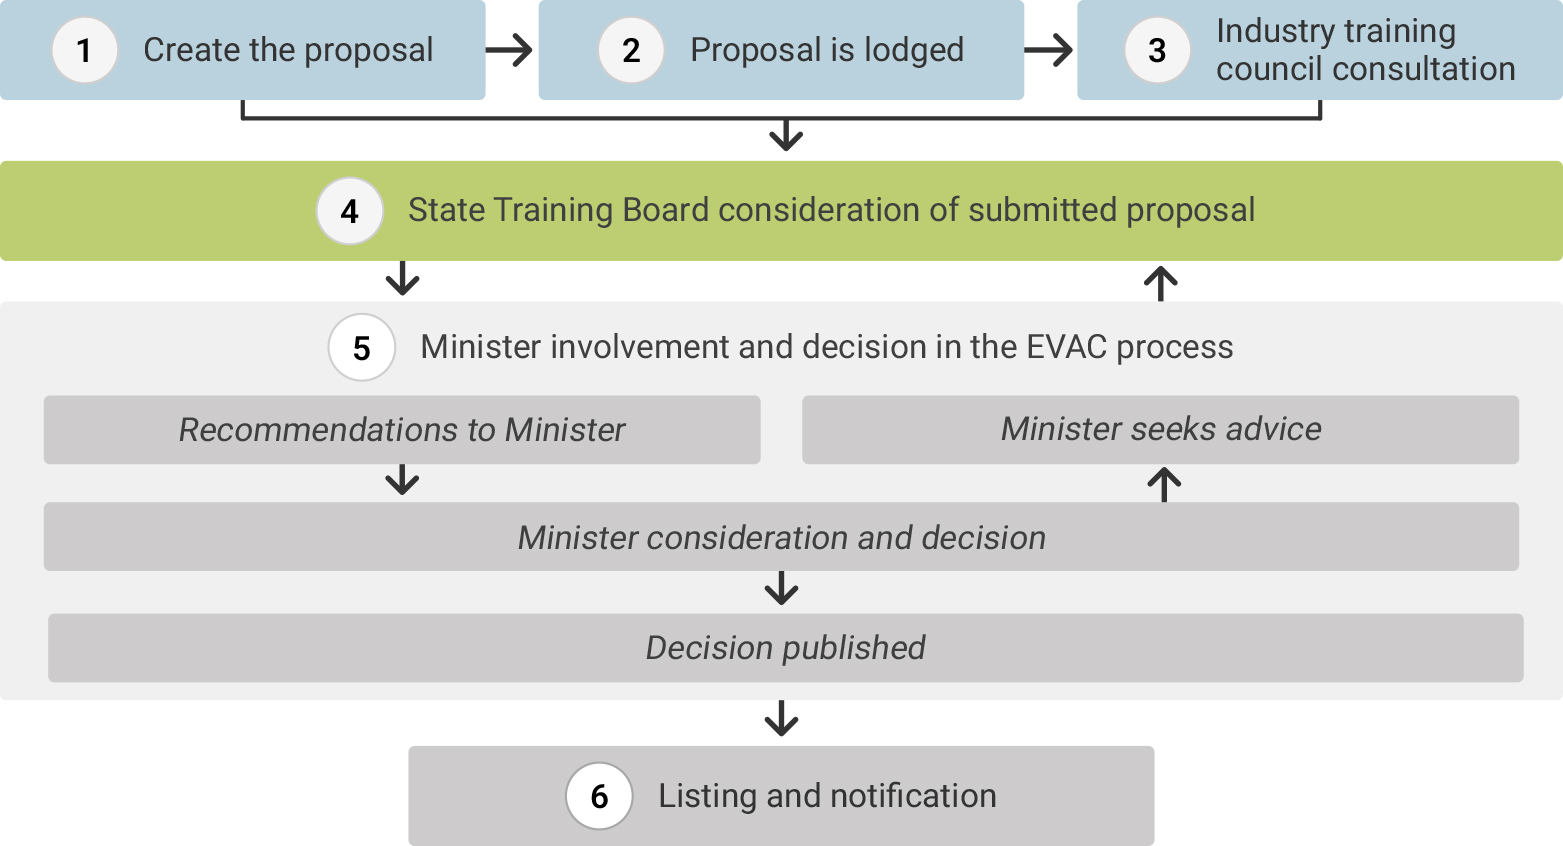 1 Create the proposal, 2 Proposal is lodged, 3 Industry training council consultation, 4 State training board considers proposal, 5 Minister involvement and decision in the EVAC process, 6 Listing and notification proposal stages in the EVAC process displayed in a workflow chart